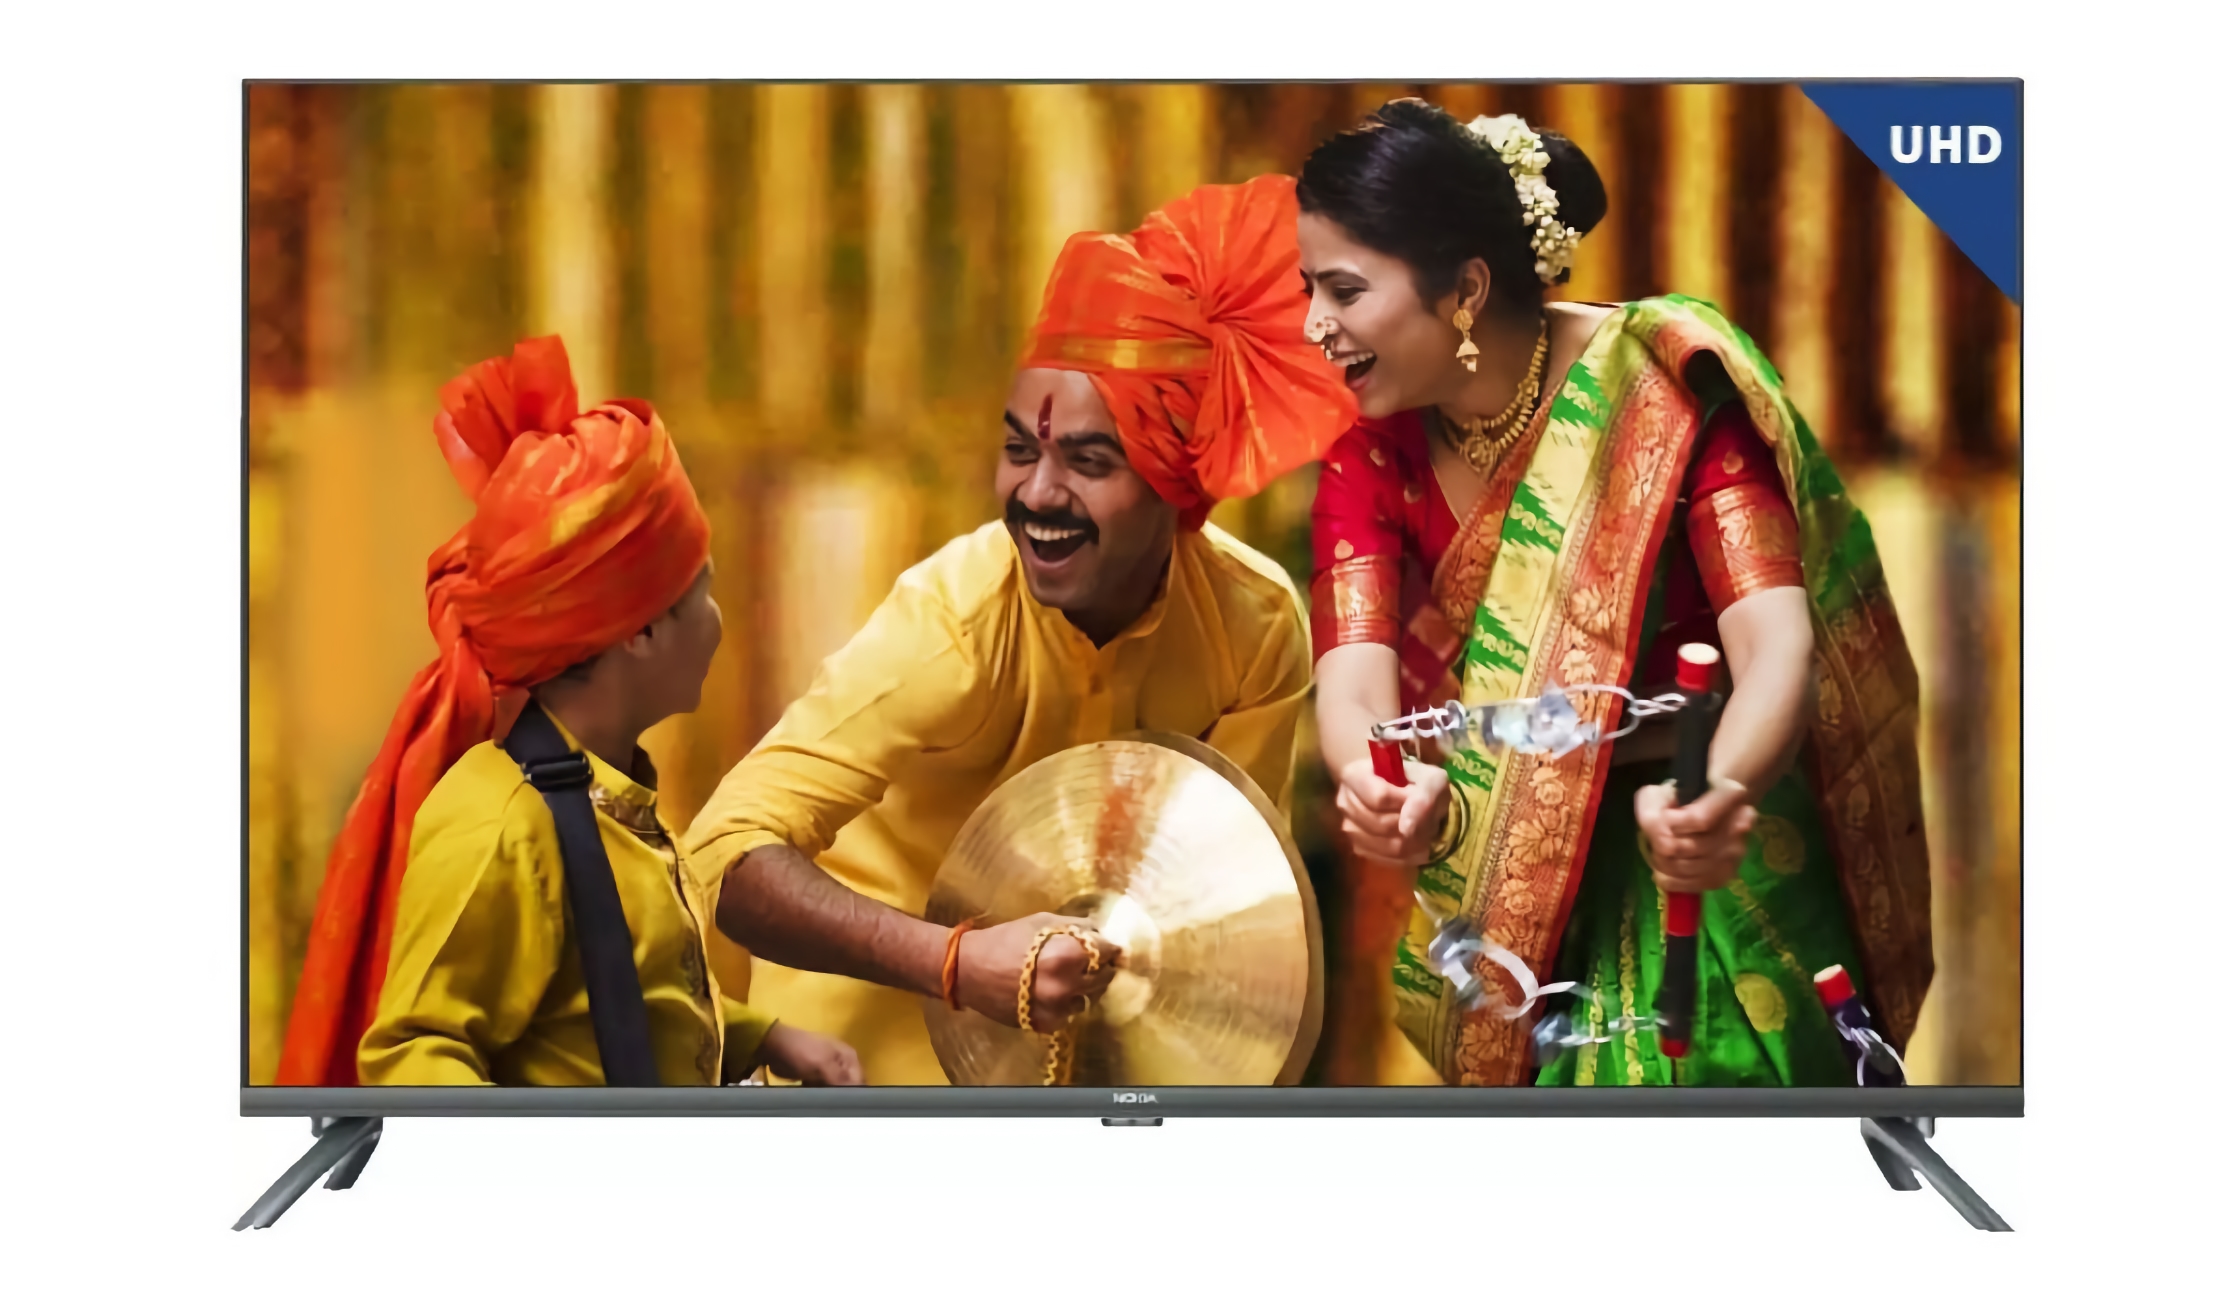 Nokia launches new line of smart TVs with screens from 32 to 55 inches, resolutions up to 4K and Android TV on board